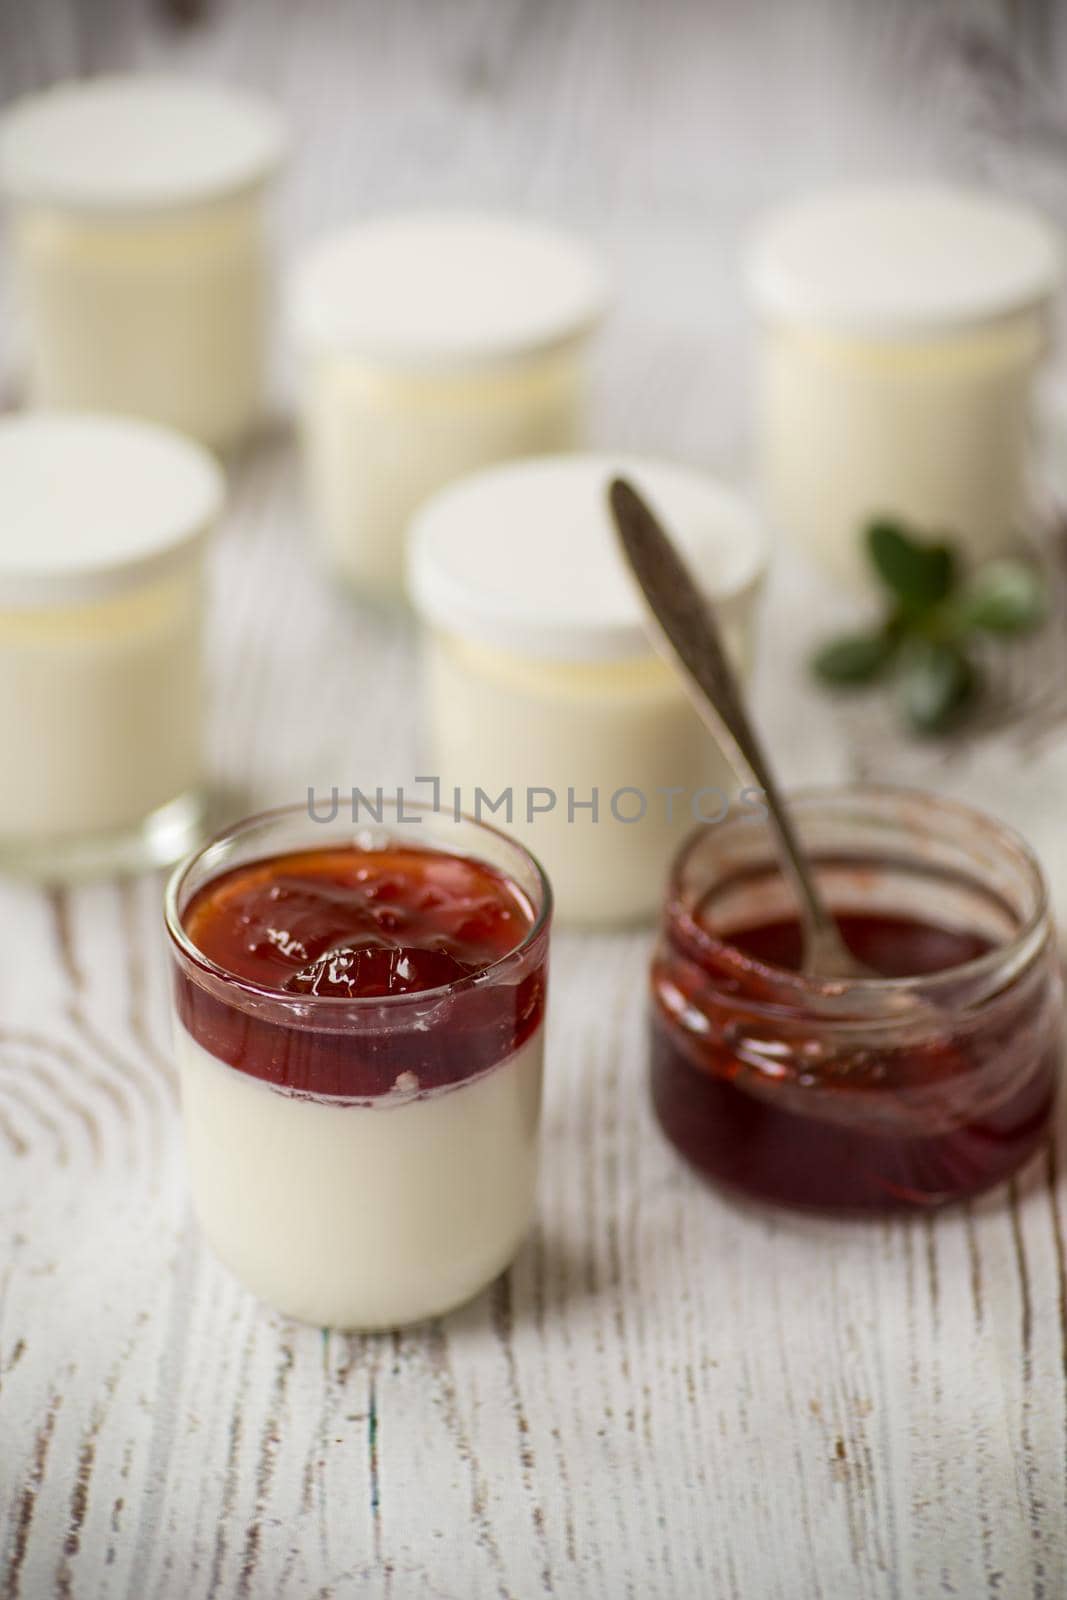 homemade sweet yogurt with fruit jam in a glass on the table